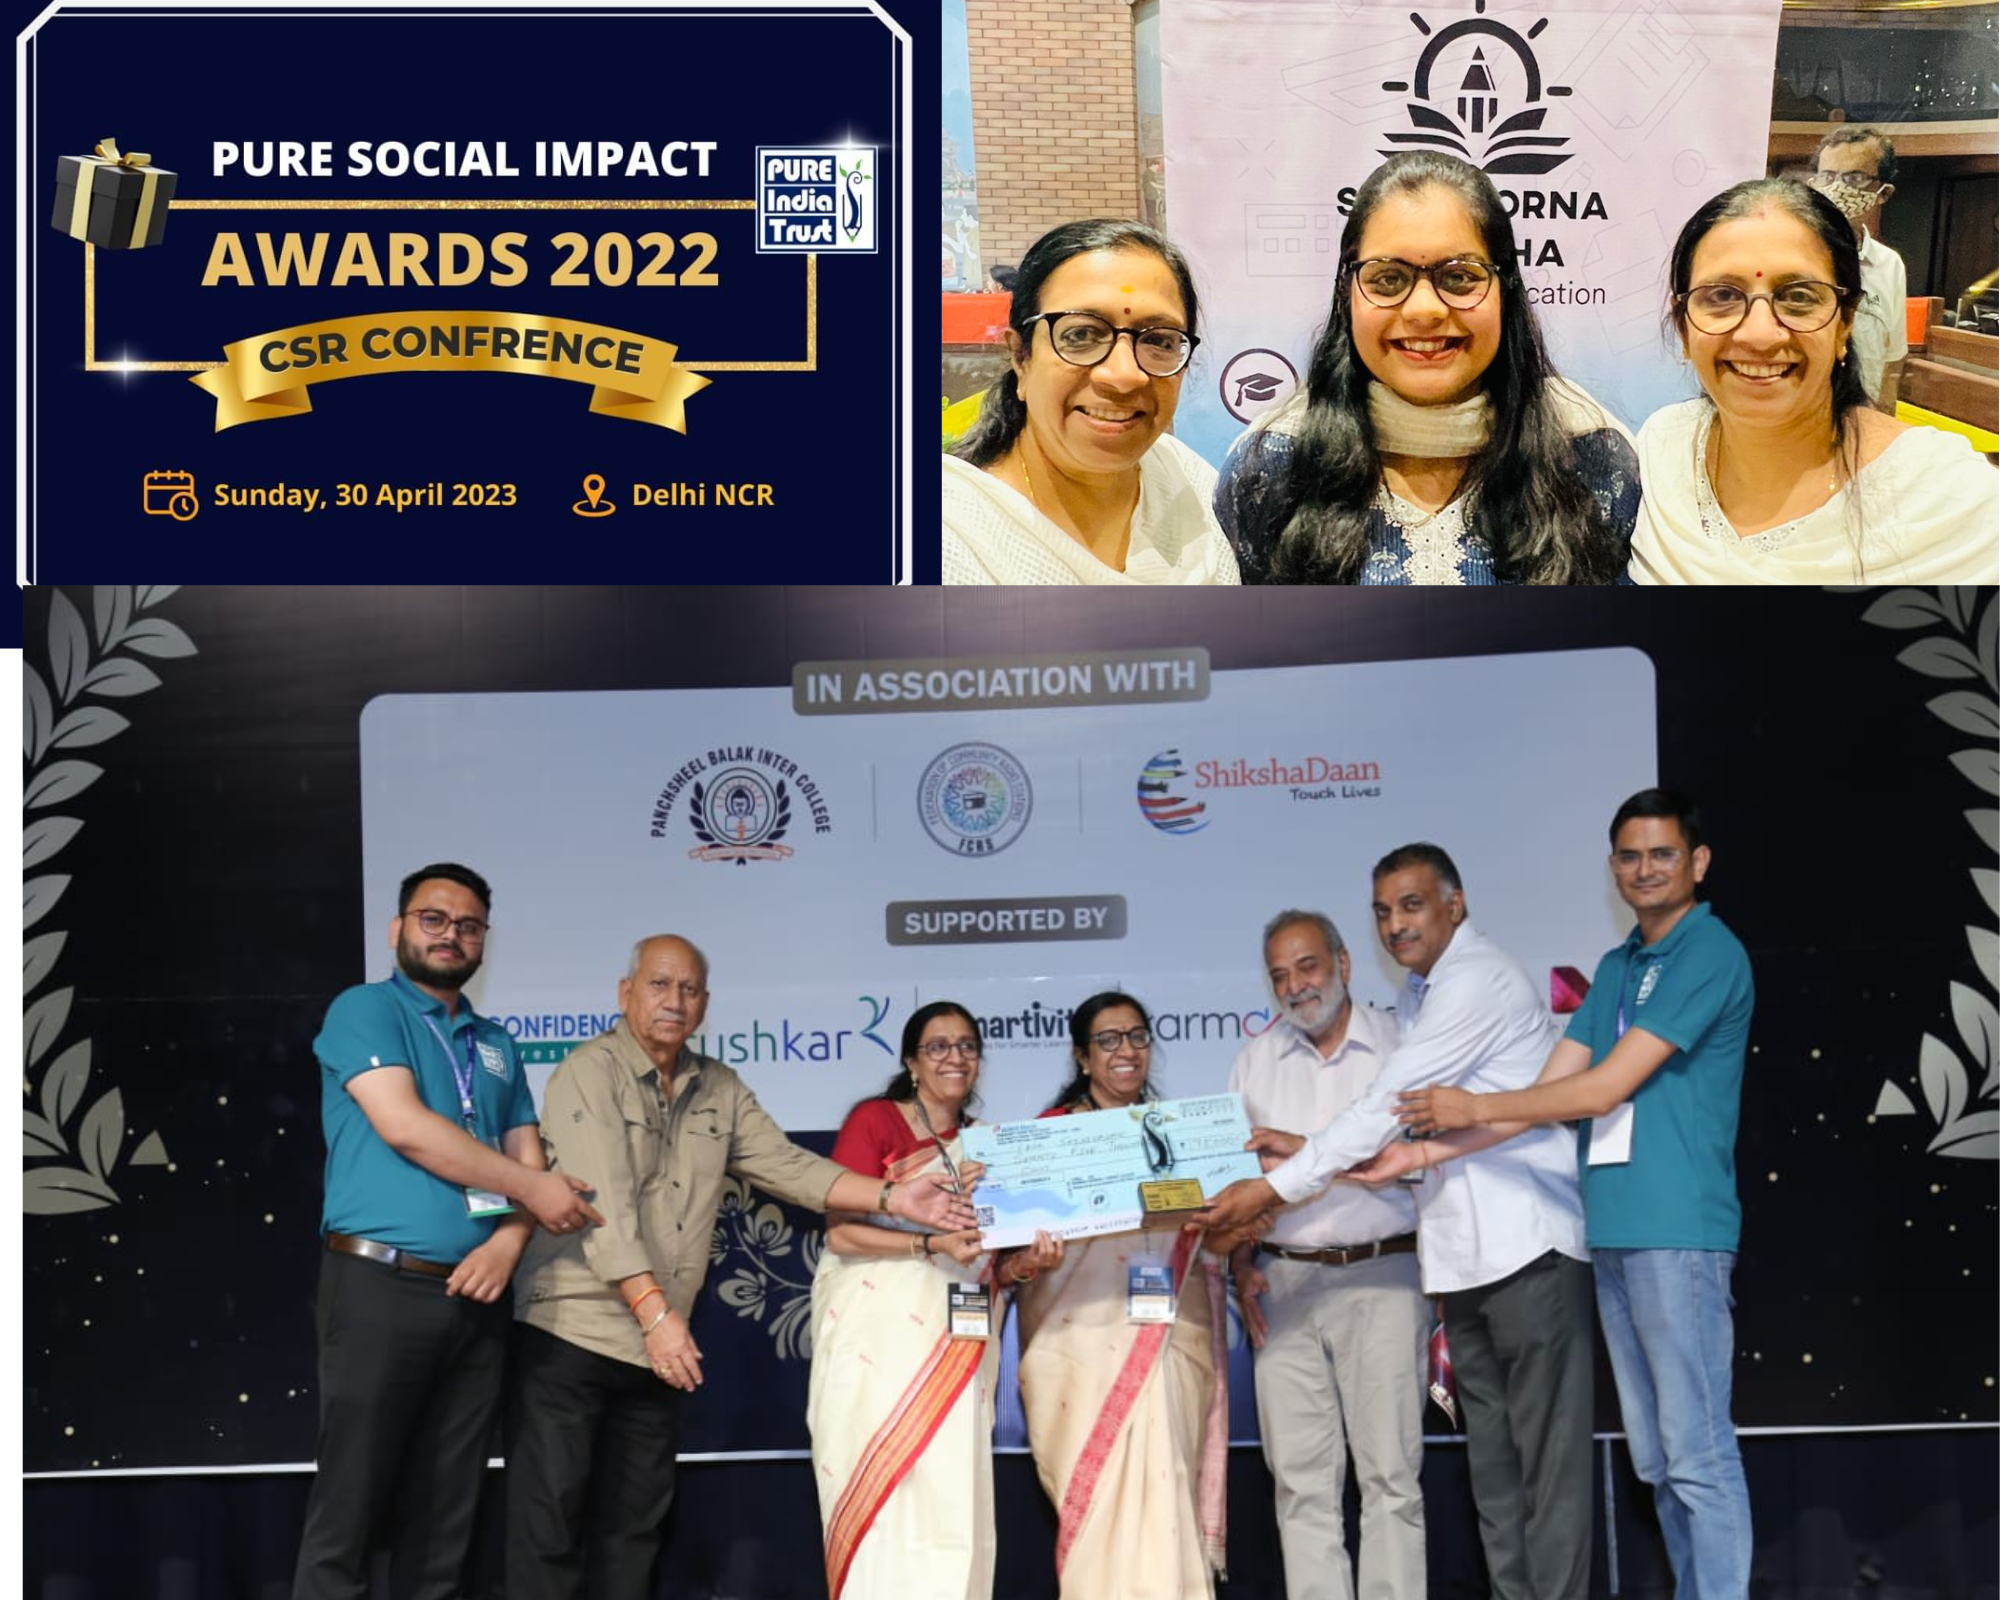 AWARDED ALL INDIA 2ND FOR- ‘PURE SOCIAL IMPACT GRANT AWARDS 2022’